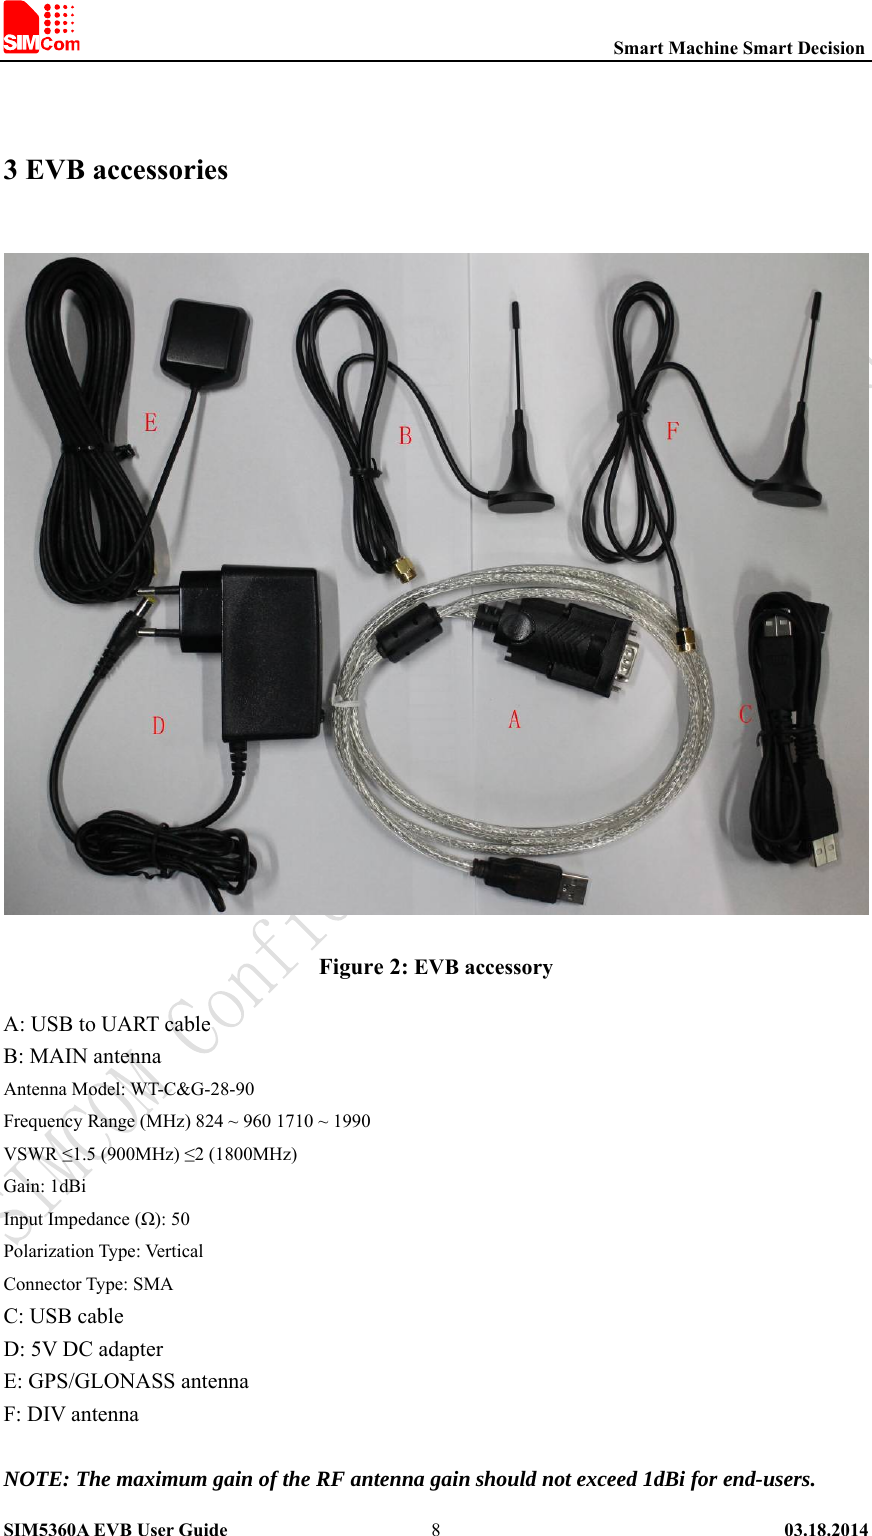                                                          Smart Machine Smart Decision SIM5360A EVB User Guide   03.18.2014   8 3 EVB accessories  Figure 2: EVB accessory A: USB to UART cable B: MAIN antenna Antenna Model: WT-C&amp;G-28-90   Frequency Range (MHz) 824 ~ 960 1710 ~ 1990   VSWR ≤1.5 (900MHz) ≤2 (1800MHz)   Gain: 1dBi Input Impedance (Ω): 50   Polarization Type: Vertical   Connector Type: SMA C: USB cable D: 5V DC adapter E: GPS/GLONASS antenna F: DIV antenna  NOTE: The maximum gain of the RF antenna gain should not exceed 1dBi for end-users.   